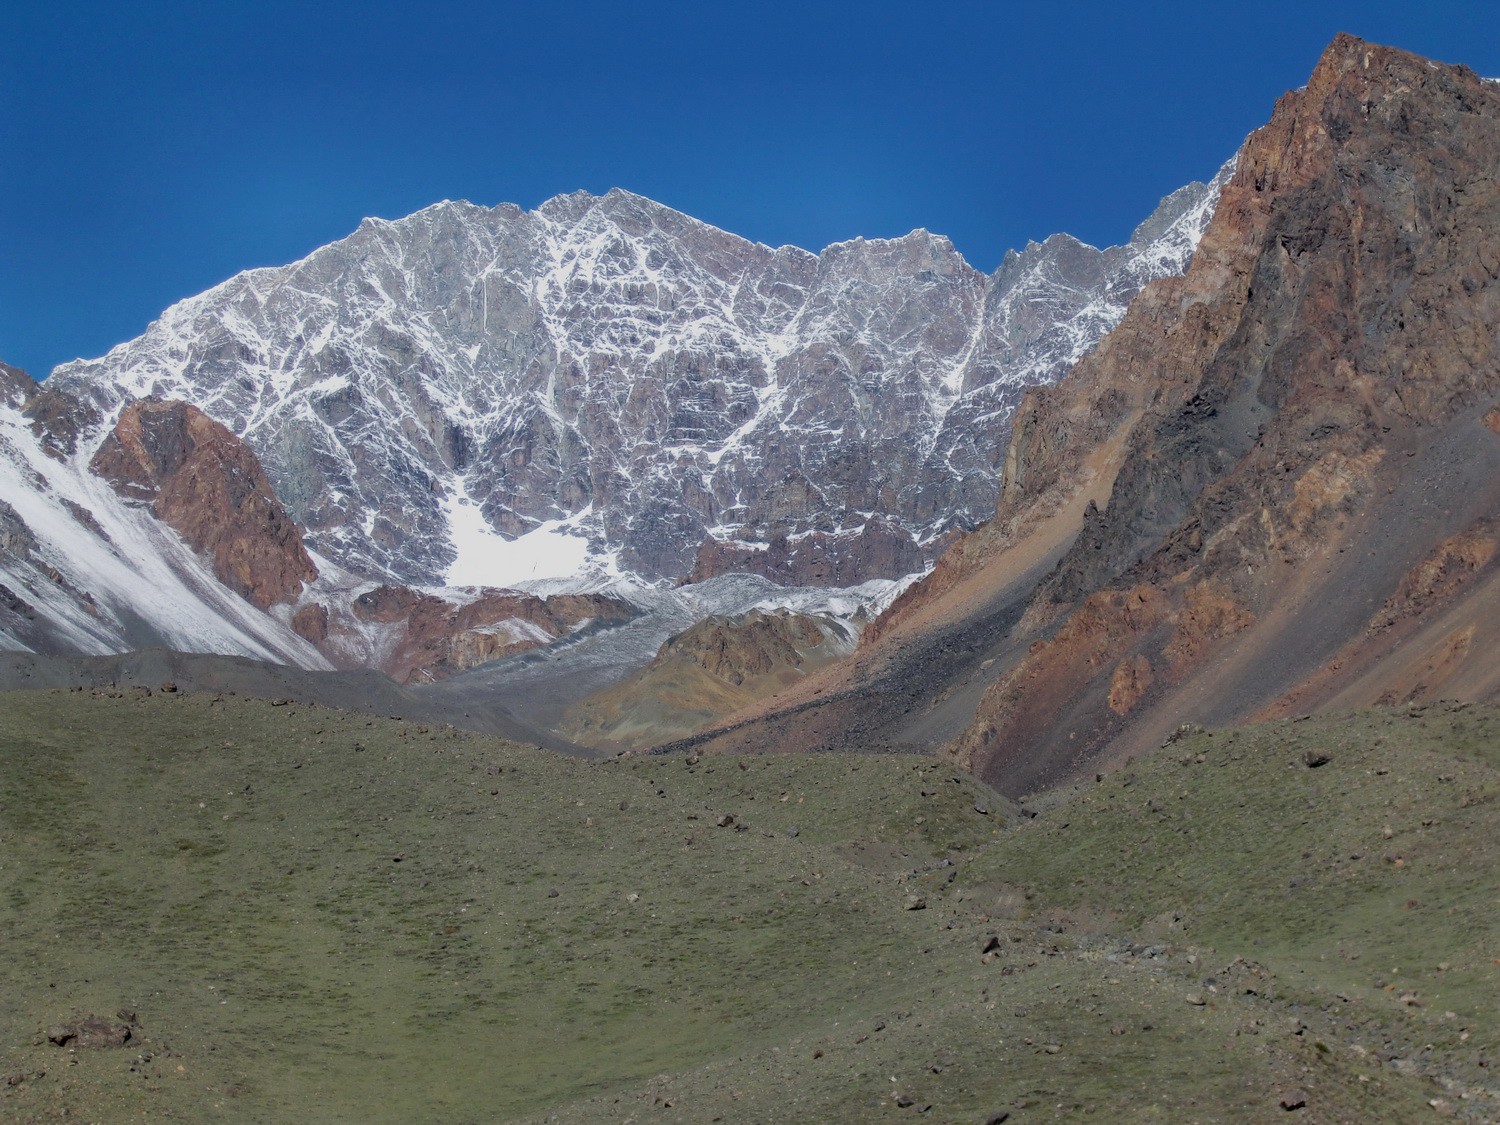 Cerros Vallecitos (5461 meters) in the top center and Adolfo Calle on the right (4210 meters)